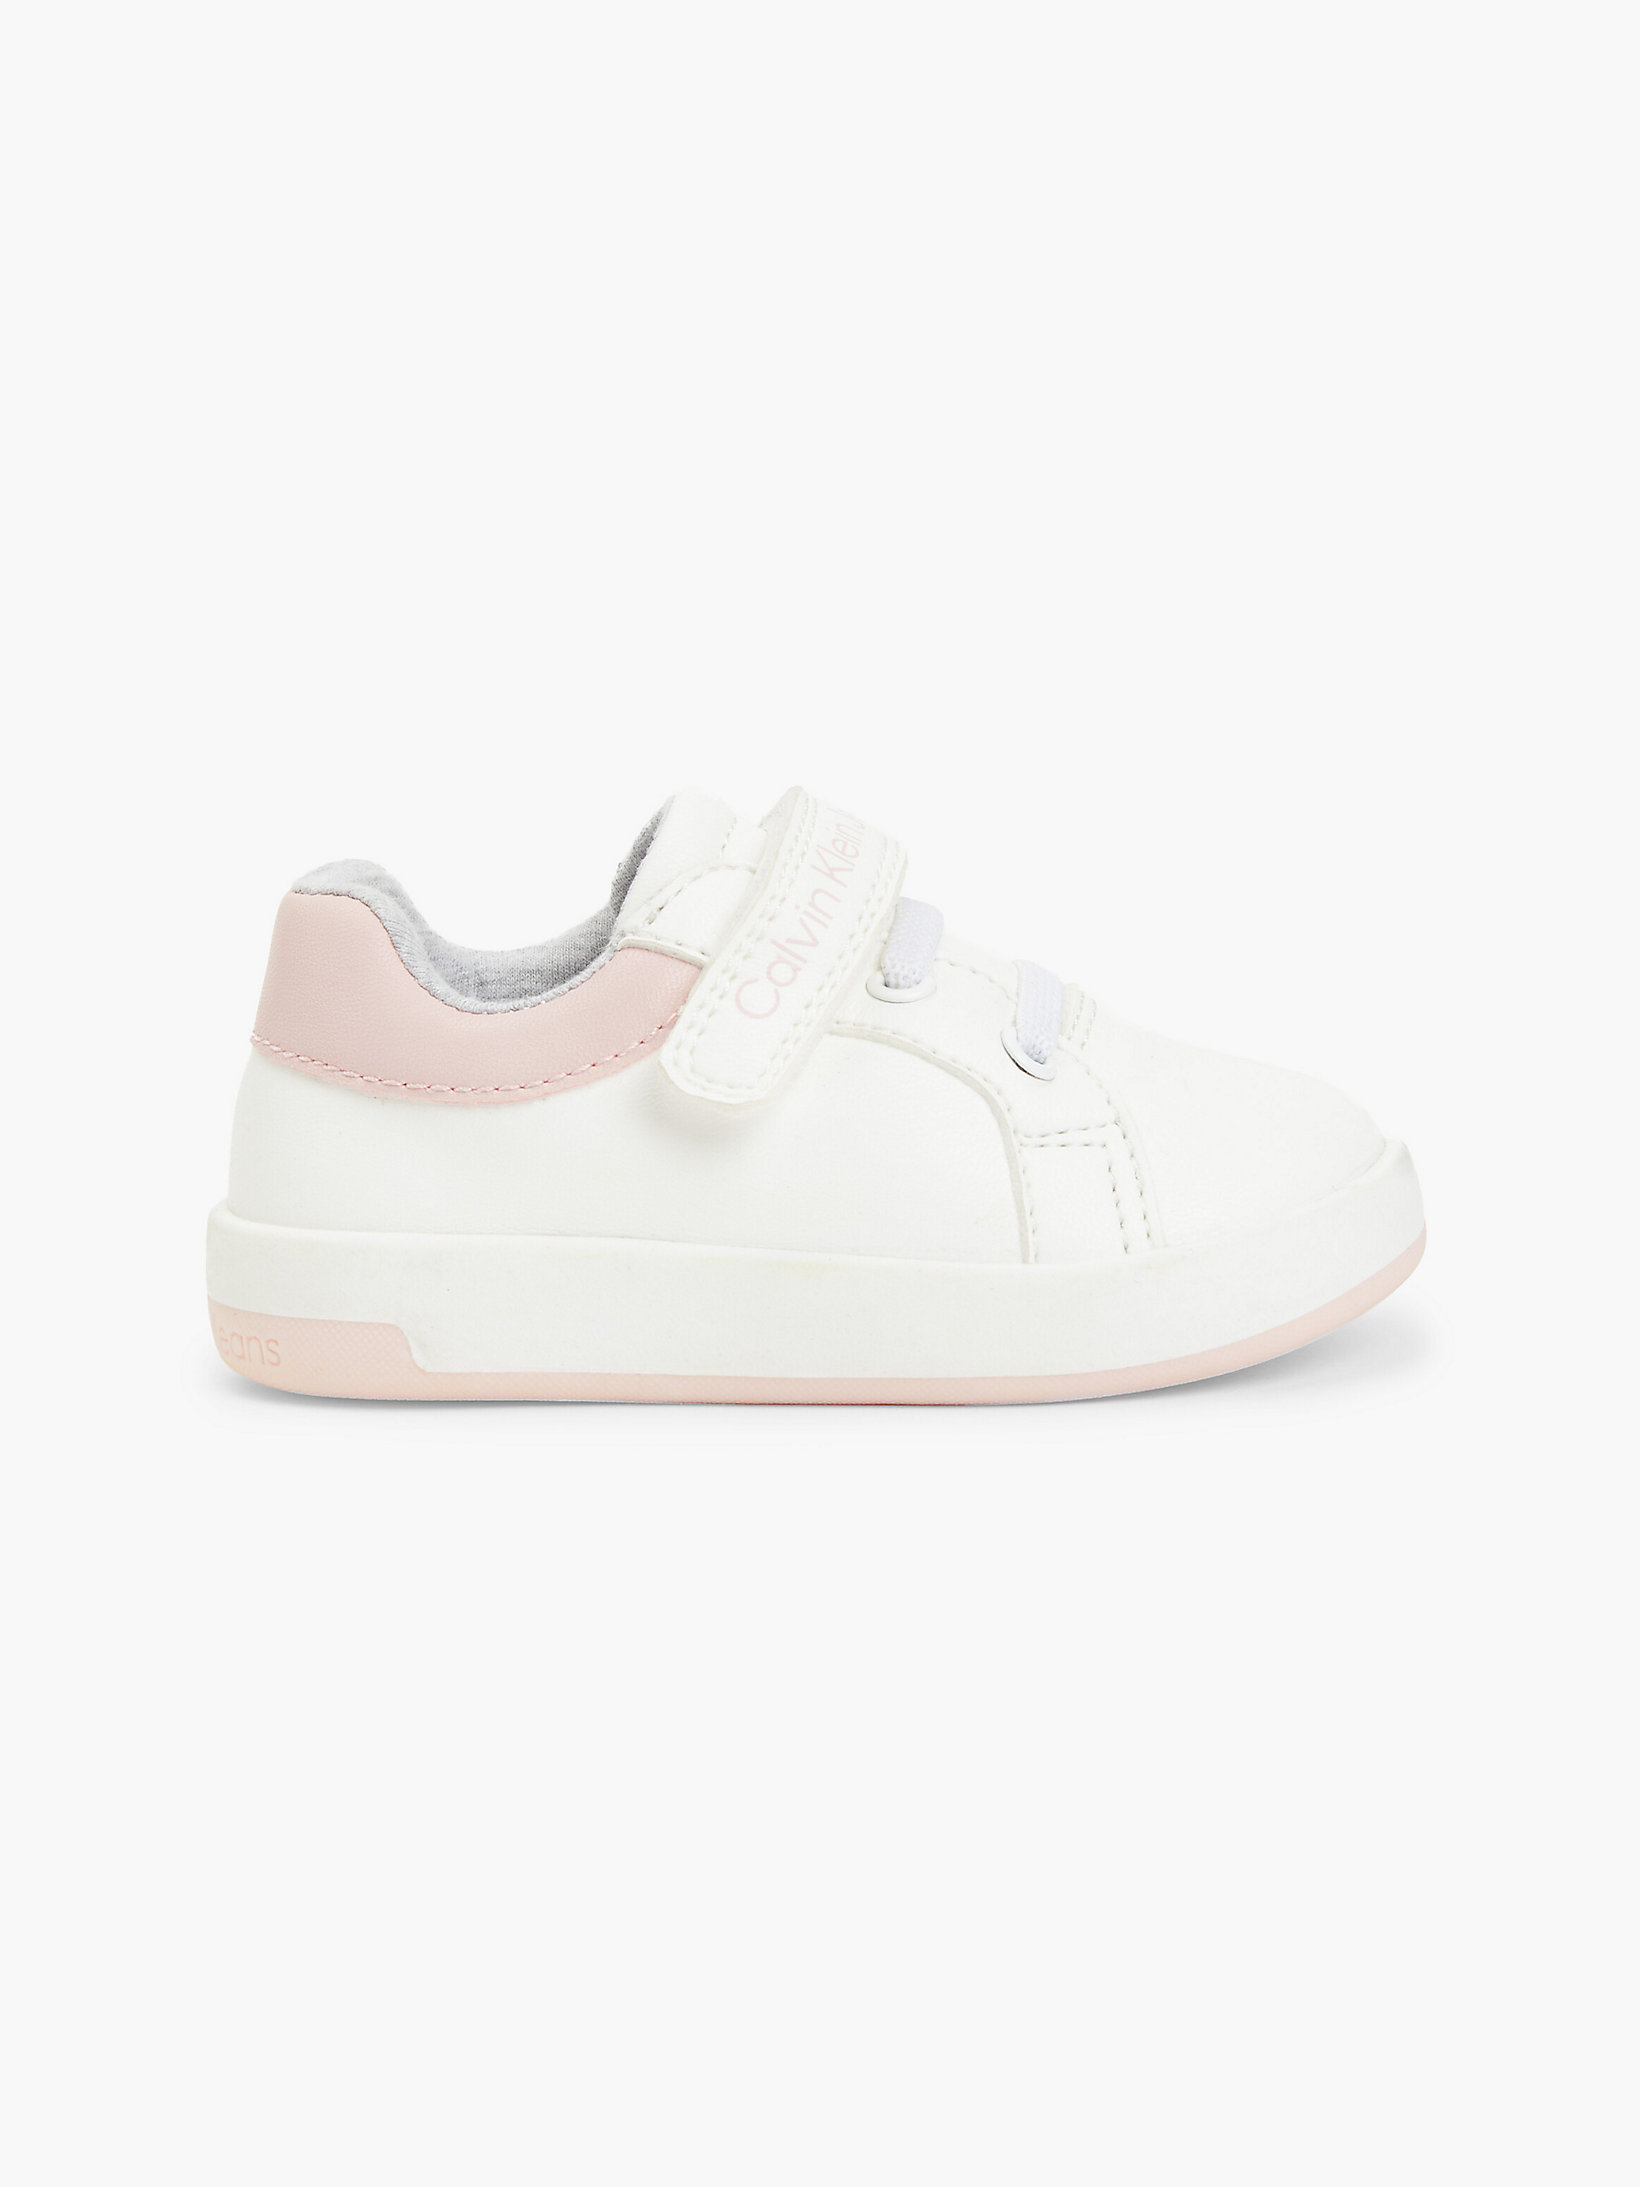 White/pink Recycled Trainers undefined girls Calvin Klein